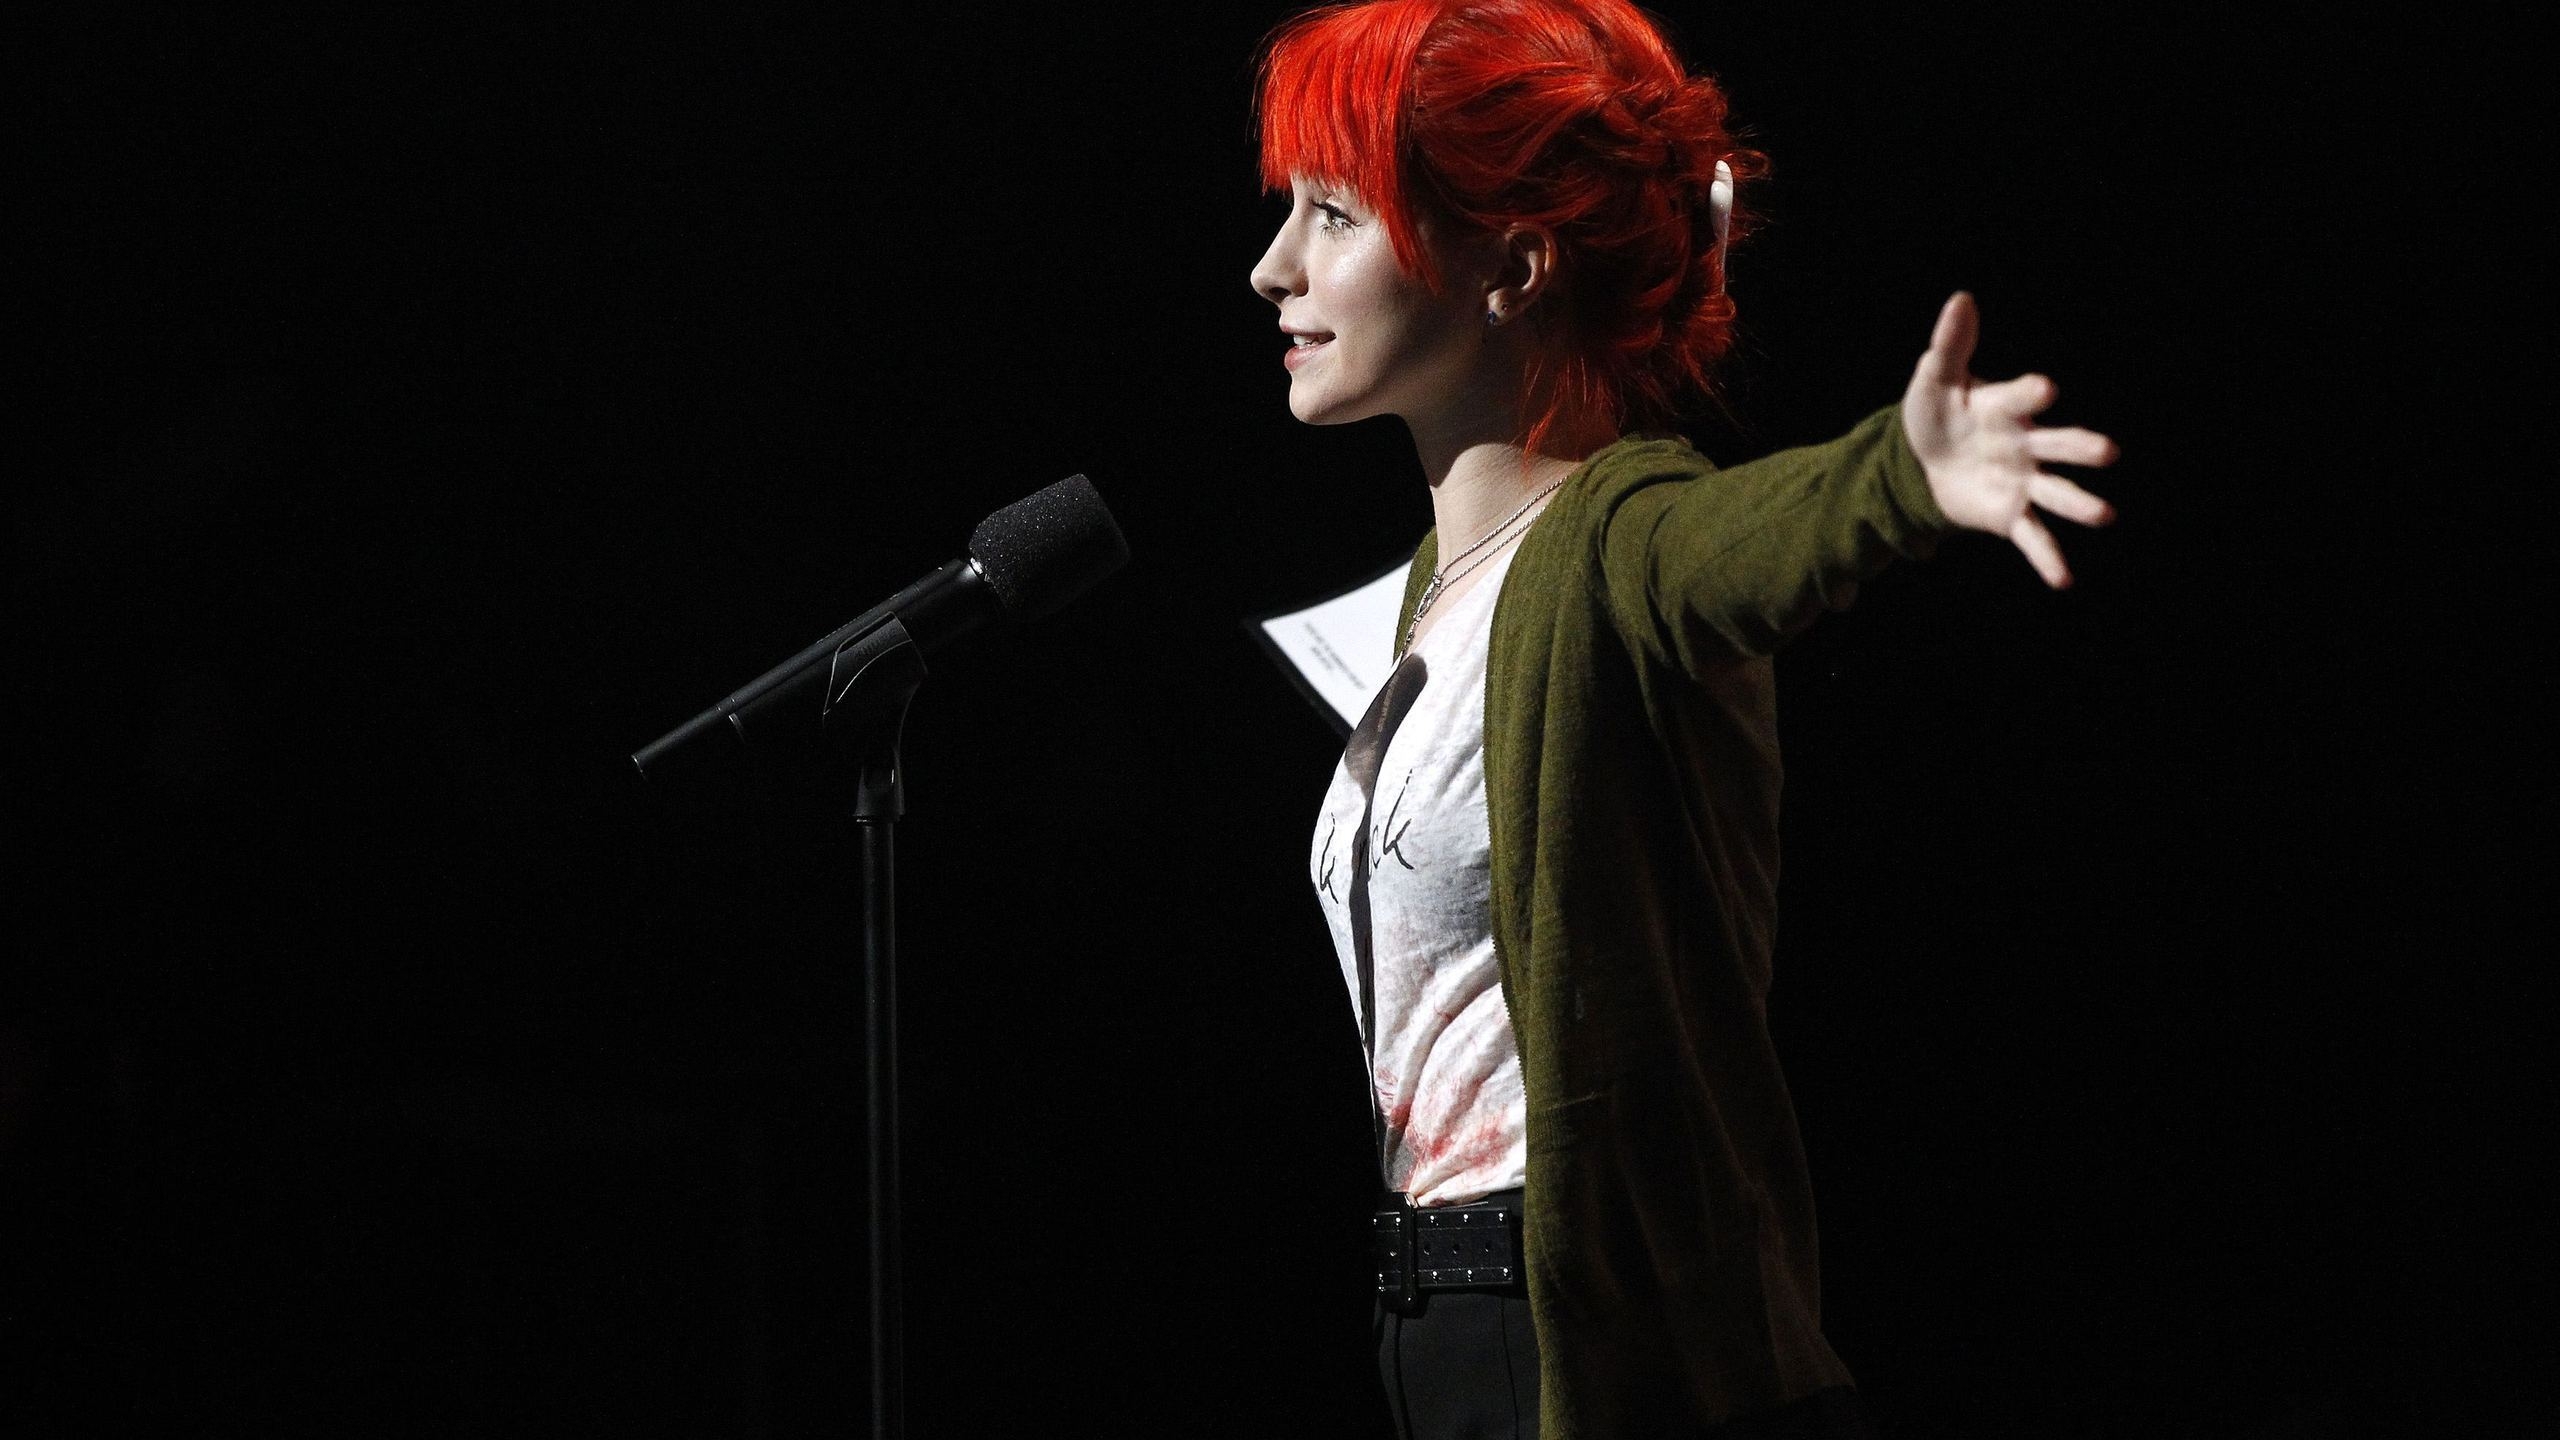 Hayley Williams Smile for 2560x1440 HDTV resolution